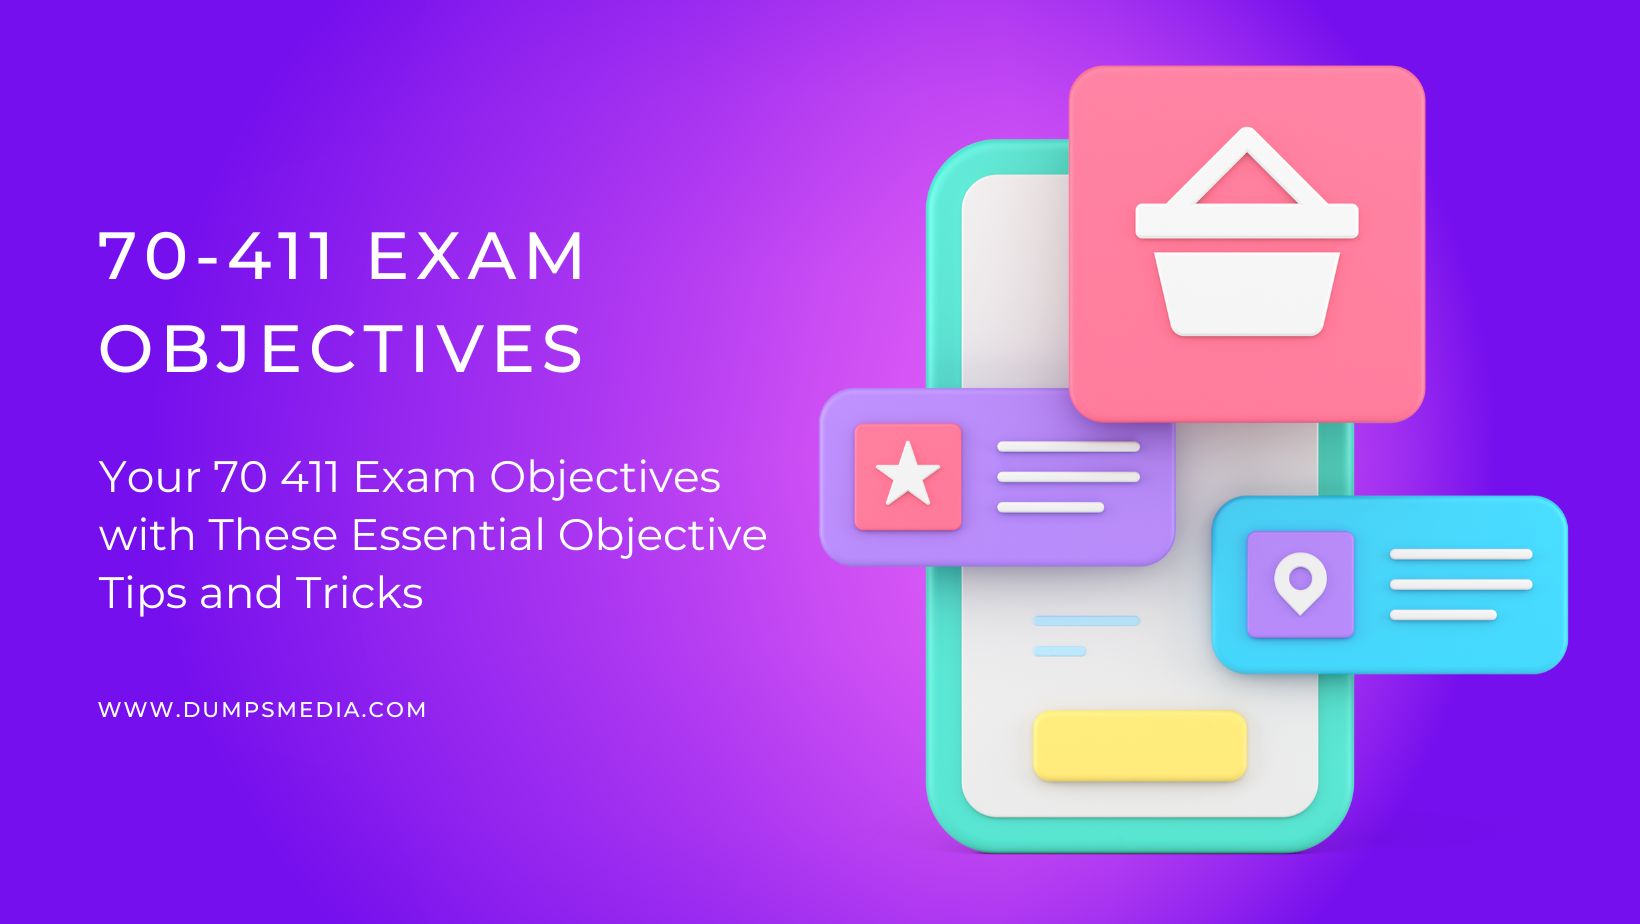 Your 70 411 Exam Objectives with These Tips and Tricks